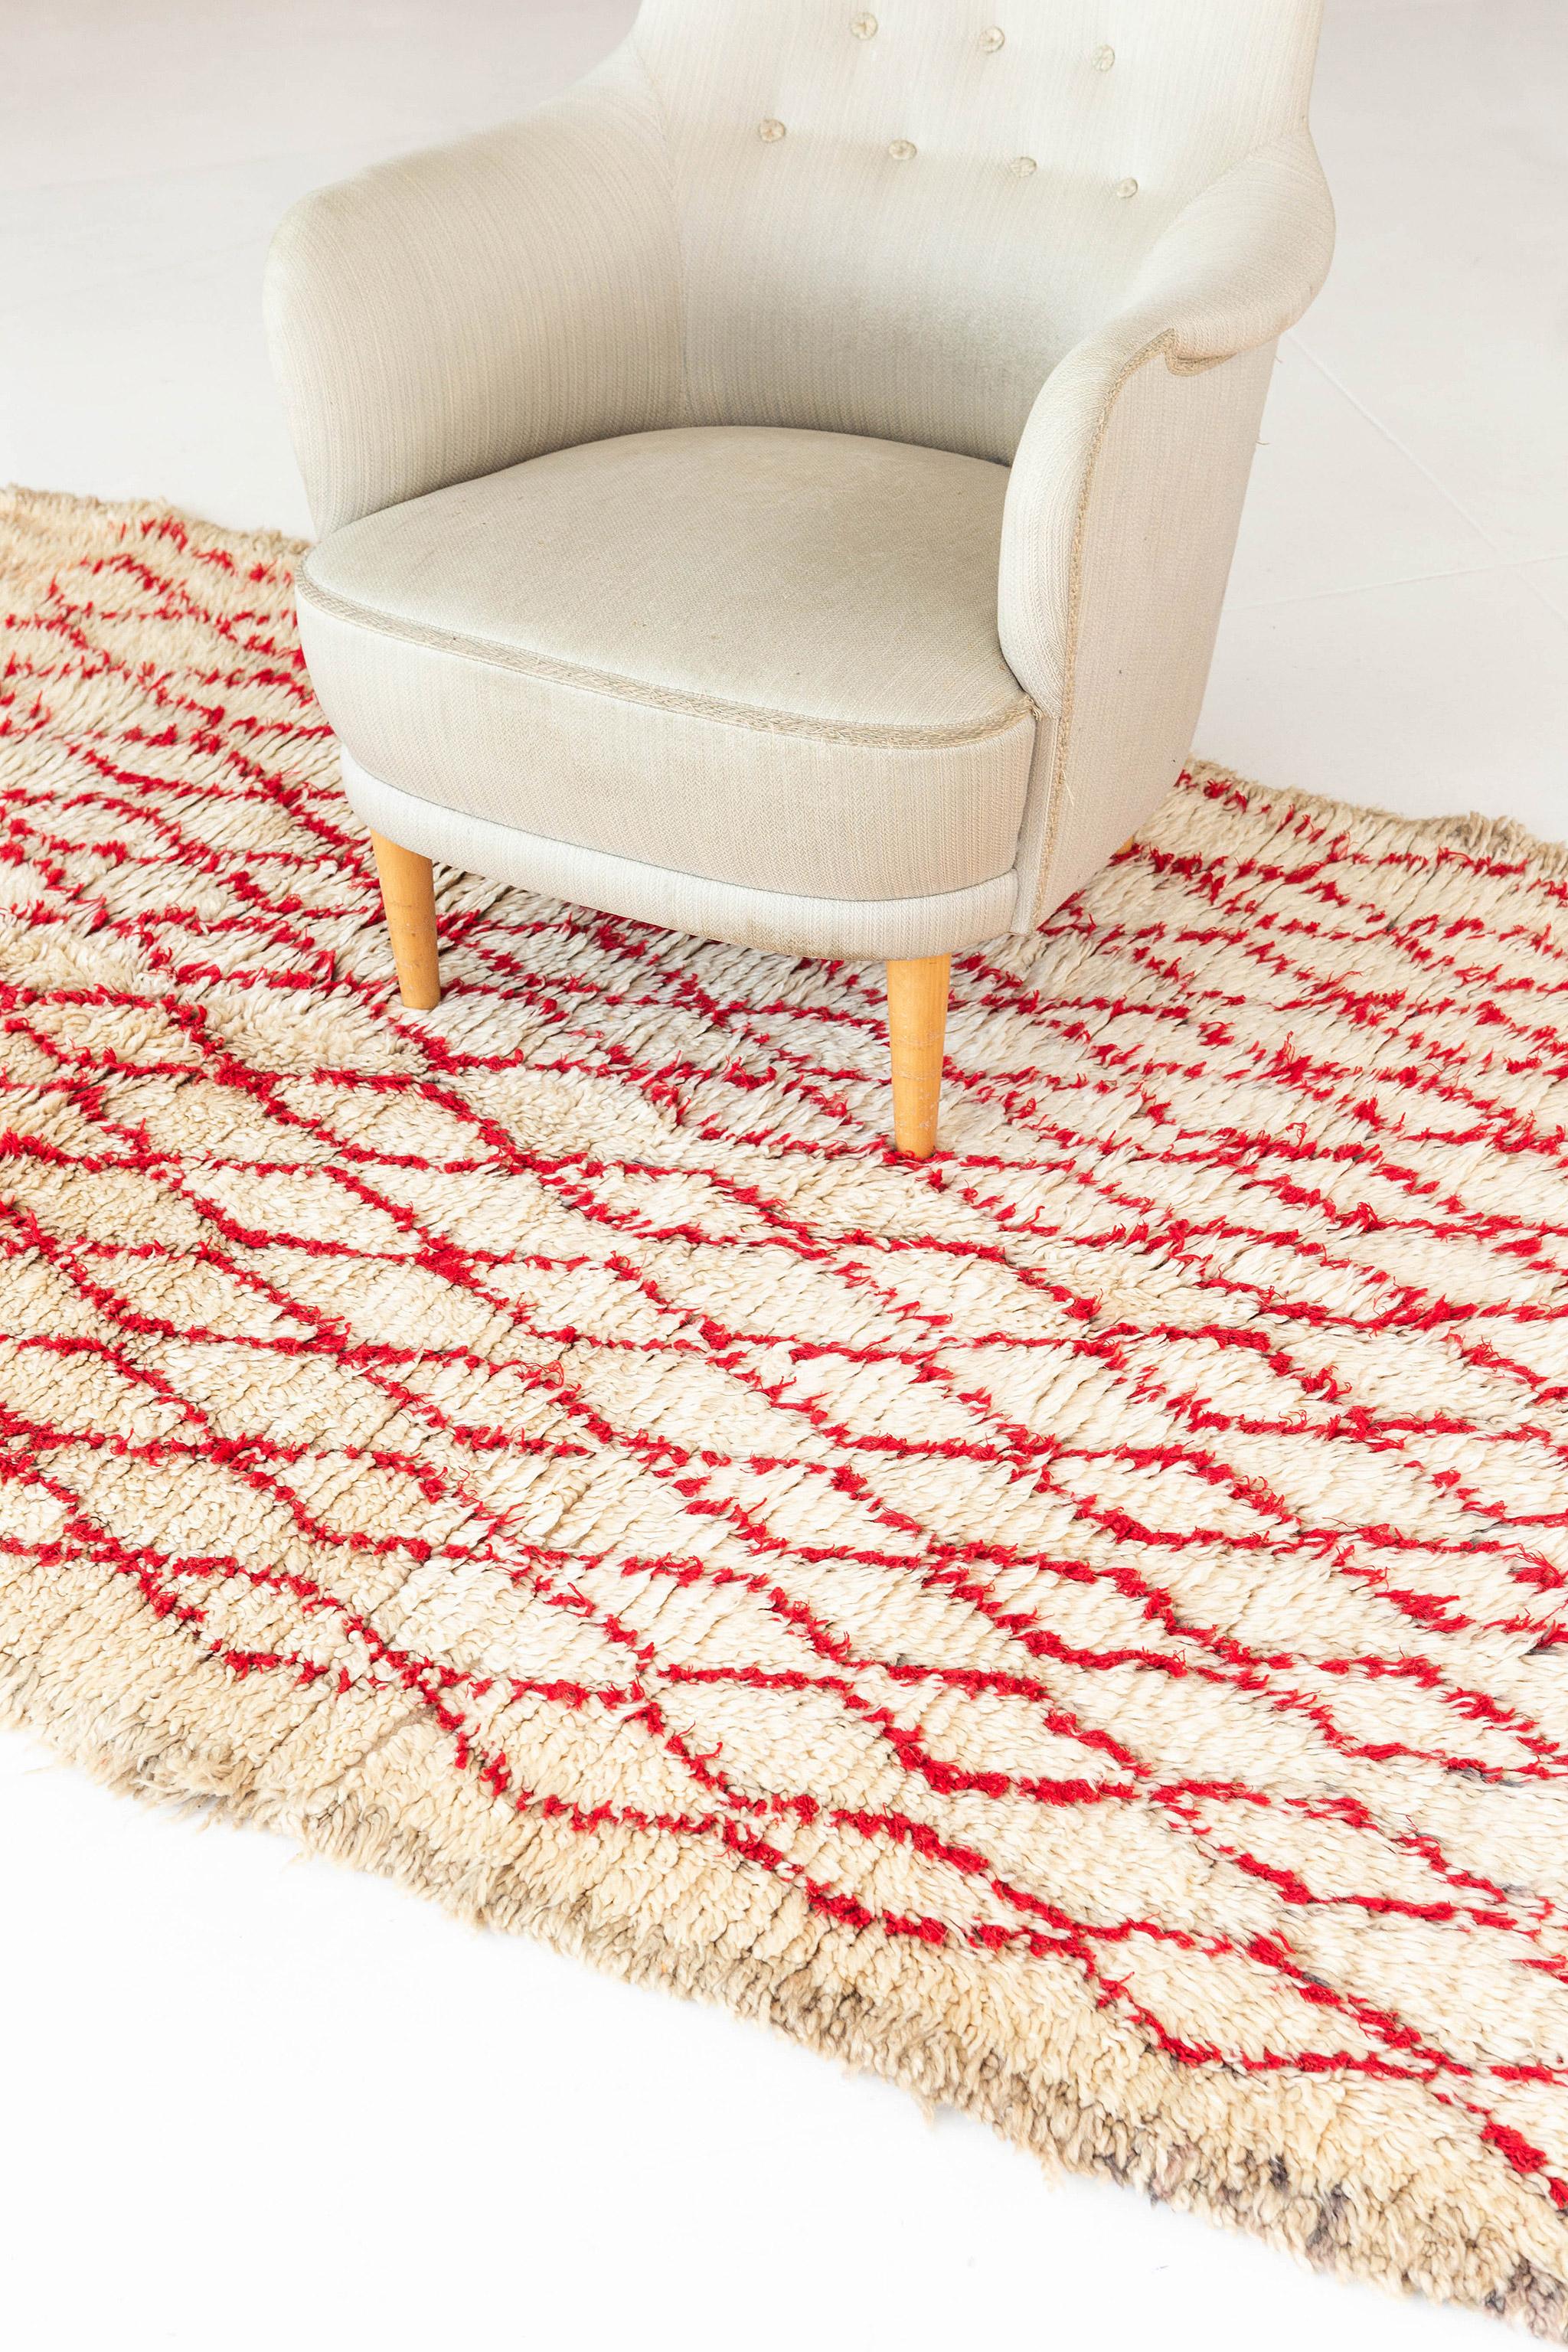 A remarkable vintage Azilal tribal rug from our Atlas Collection exhibits the symbolism including recognizable lozenges. An interesting story narrated by the skillful weavers that are open to interpretation. Knotted in shades of red and surrounded